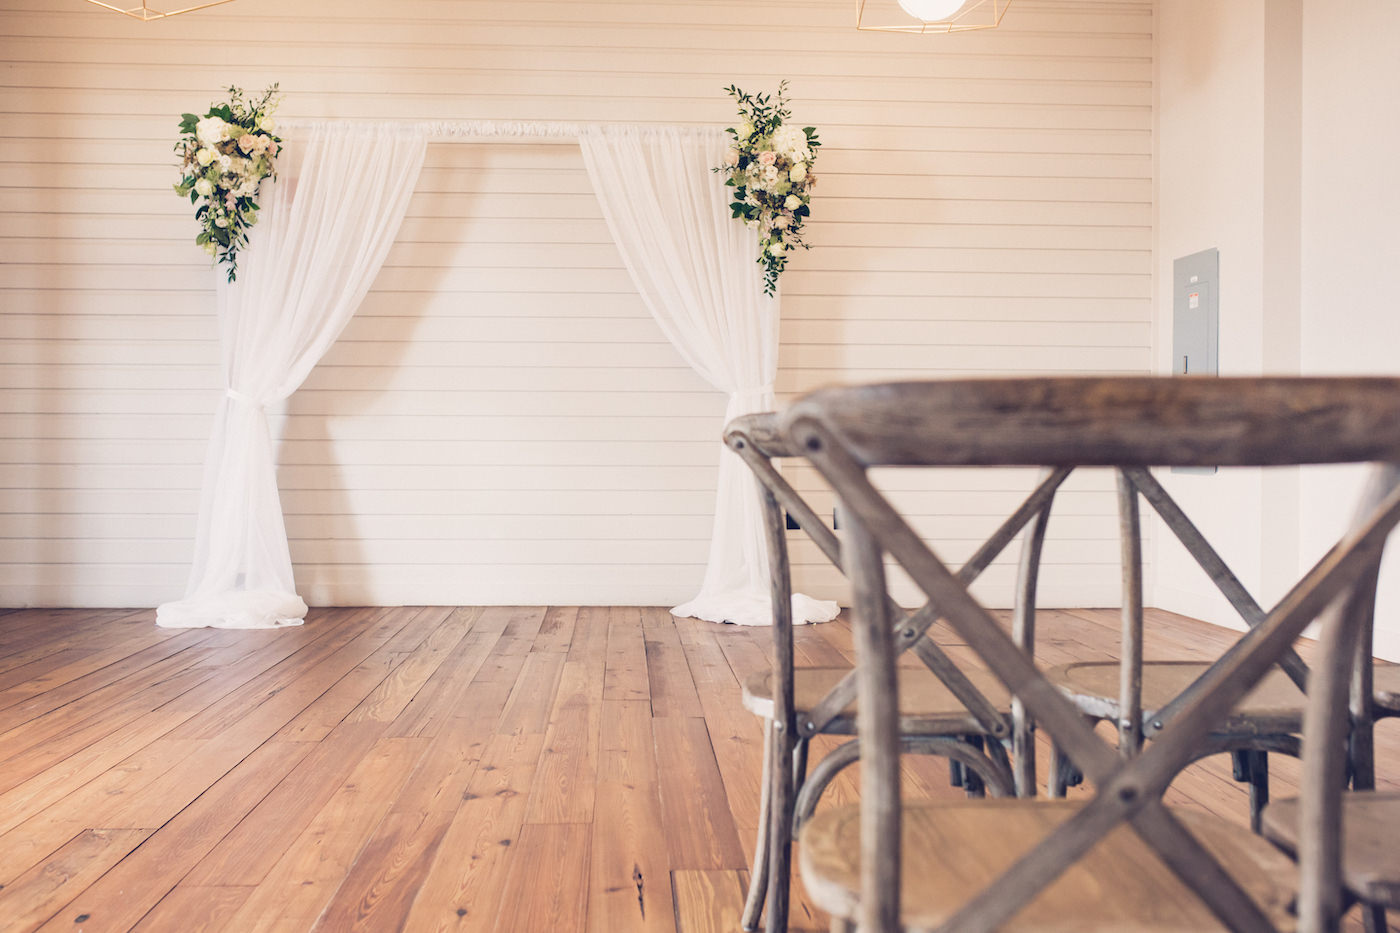 Indoor Tampa Wedding Ceremony with Pipe and Drape Fabric Arch Backdrop with Greenery and White Flower Arrangements and French Country Cross Back Wood Chairs